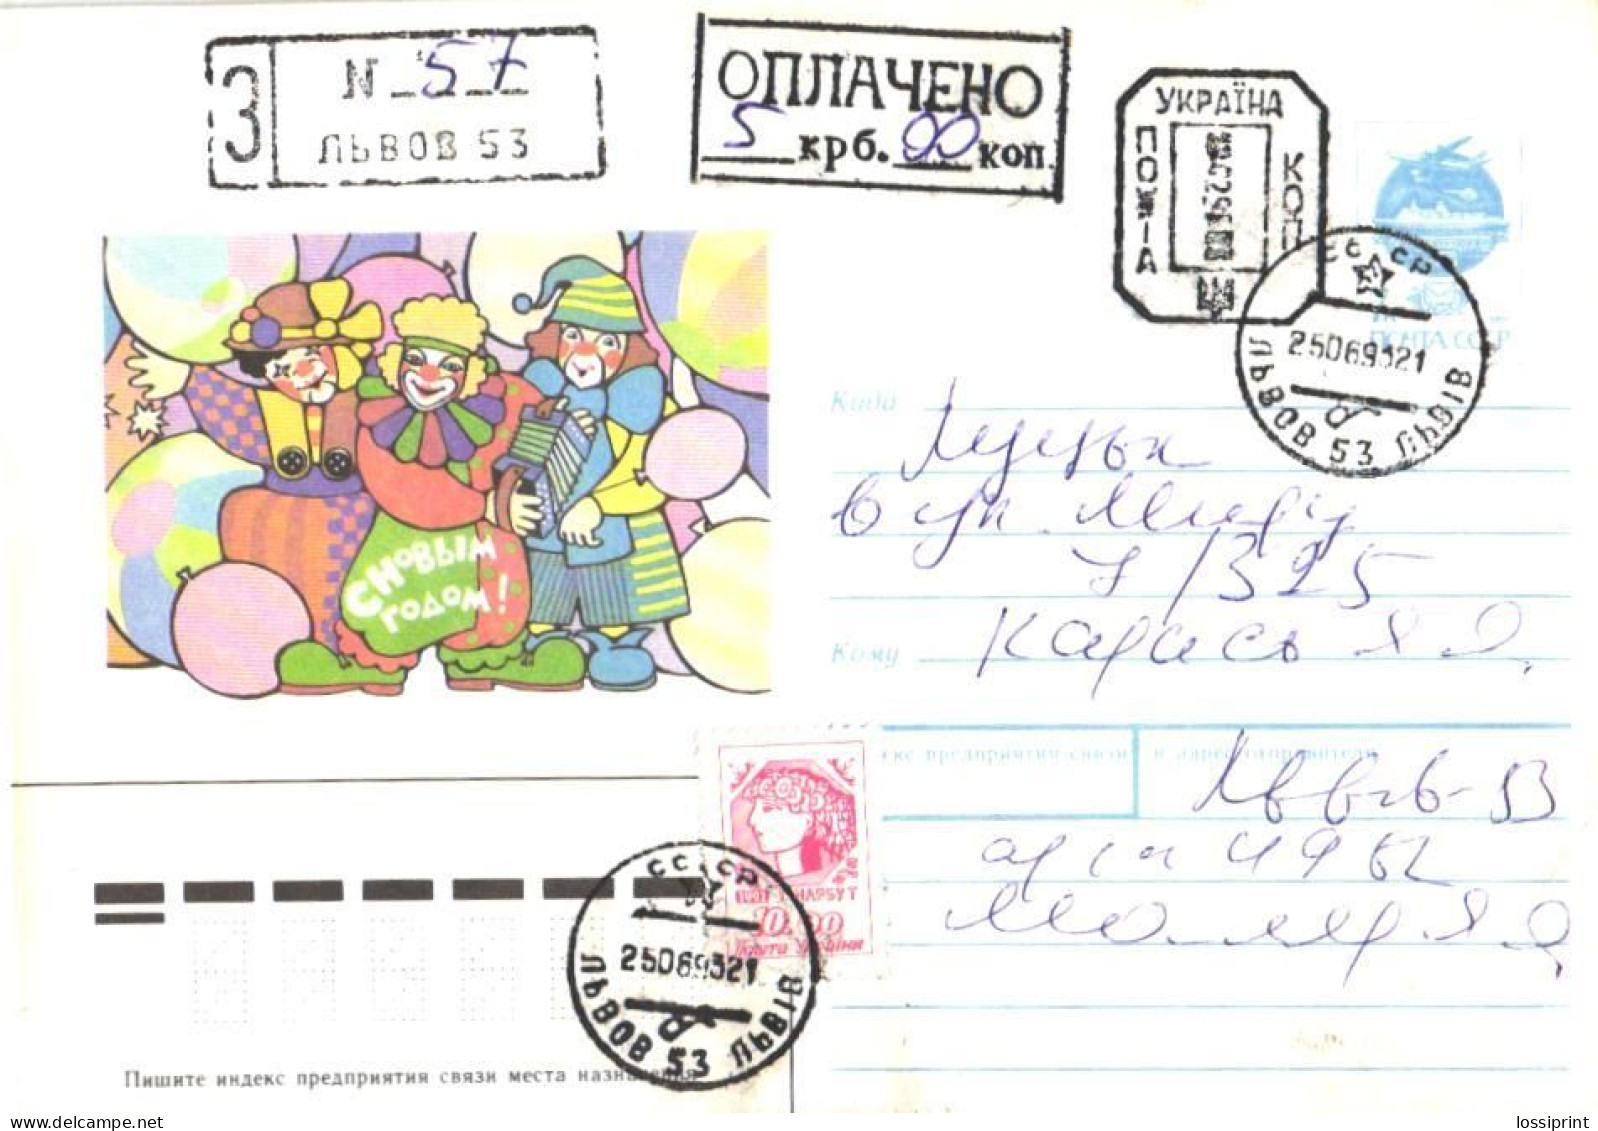 Ukraine:Ukraina:Registered Letter From Lvov 53 With Stamp Cancellation And Stamp And Surcharge Cancellation, 1993 - Ukraine